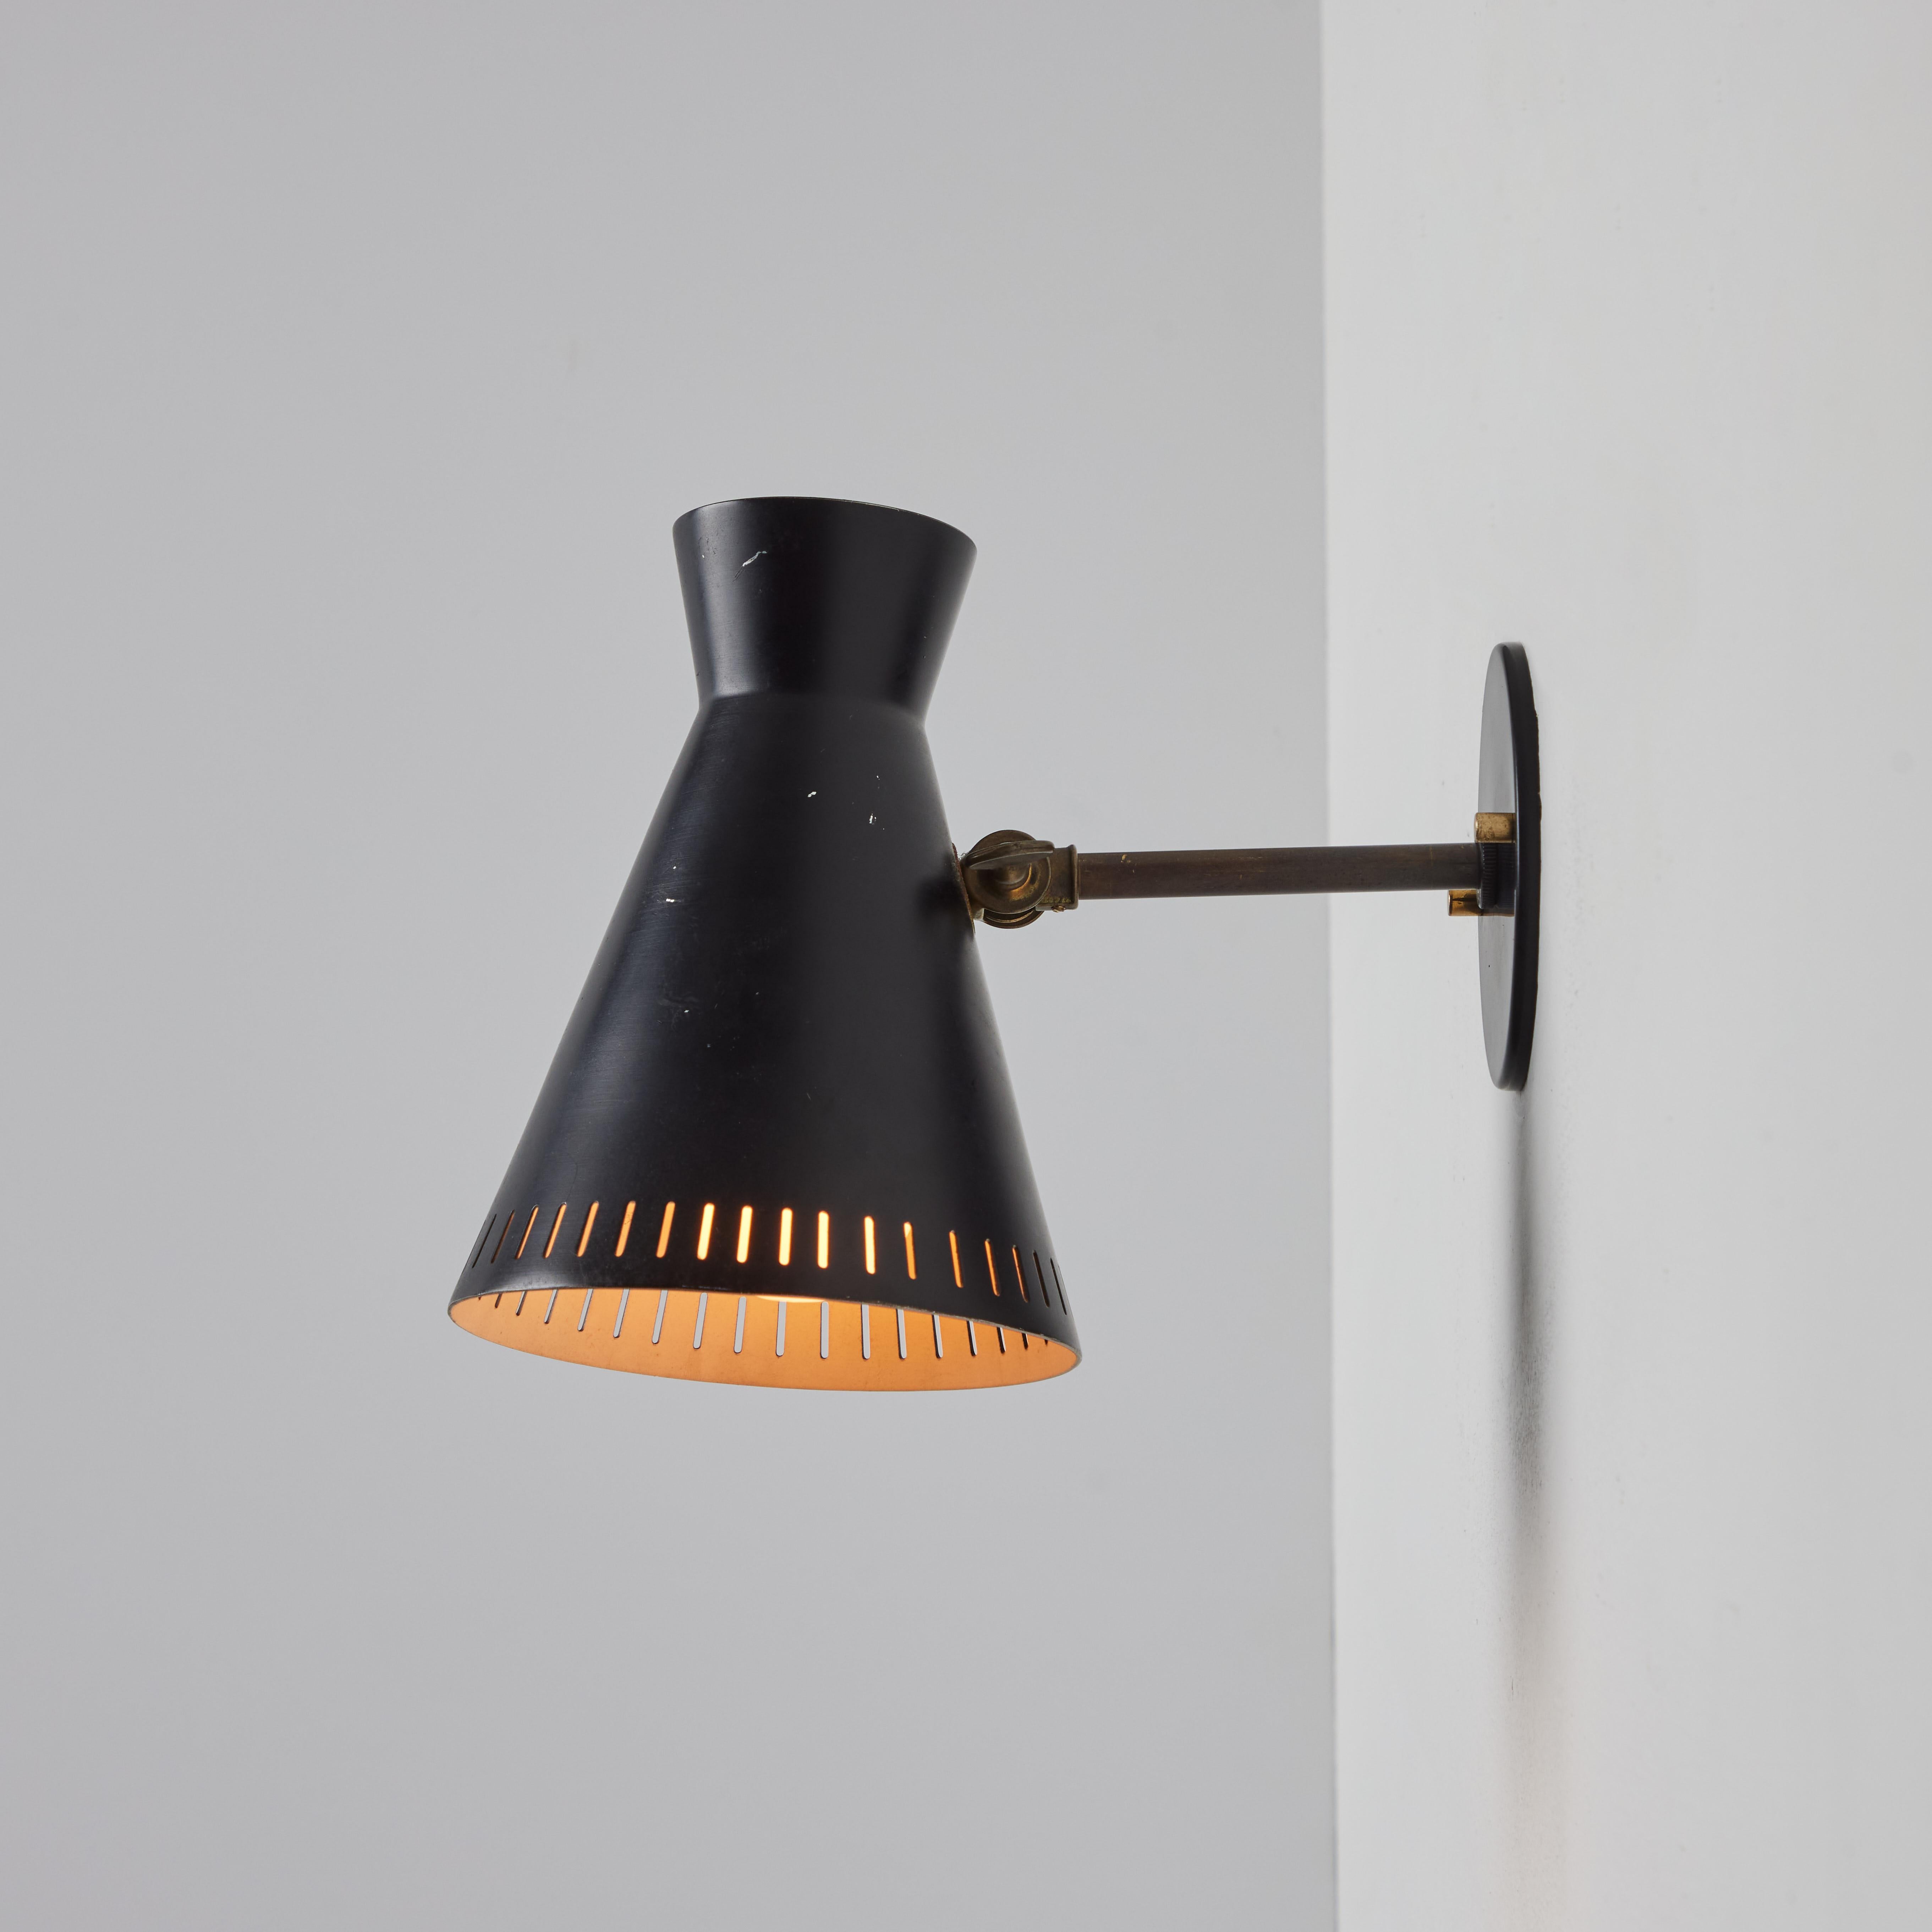 1950s Perforated Black Metal Diabolo Wall Lamp Attributed to Mauri Almari For Sale 8